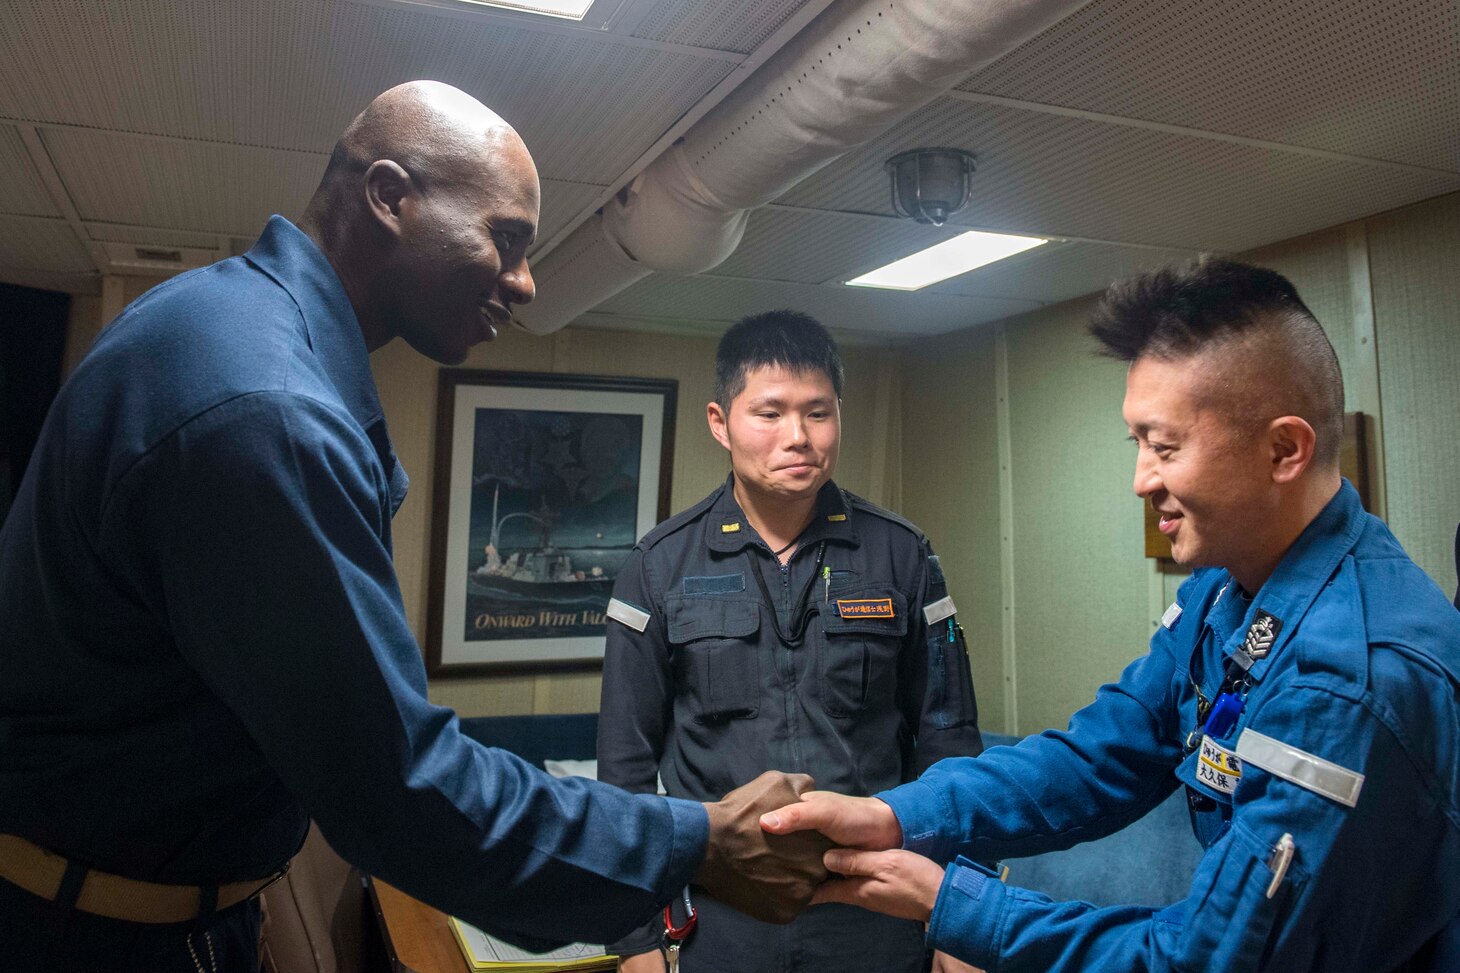 WATERS SOUTH OF JAPAN (Dec. 4, 2018) Cmdr. Leroy Mitchell, commanding officer of the Arleigh Burke-class guided-missile destroyer USS Benfold (DDG 65), greets Japan Maritime Self-Defense Force (JMSDF) Chief Operations Specialist Hideki Okubo, assigned to the JMSDF destroyer JS Hyuga (DDH-181), in the captain’s cabin during a tour aboard Benfold. Benfold is forward-deployed to the U.S. 7th Fleet area of operations in support of security and stability in the Indo-Pacific region.